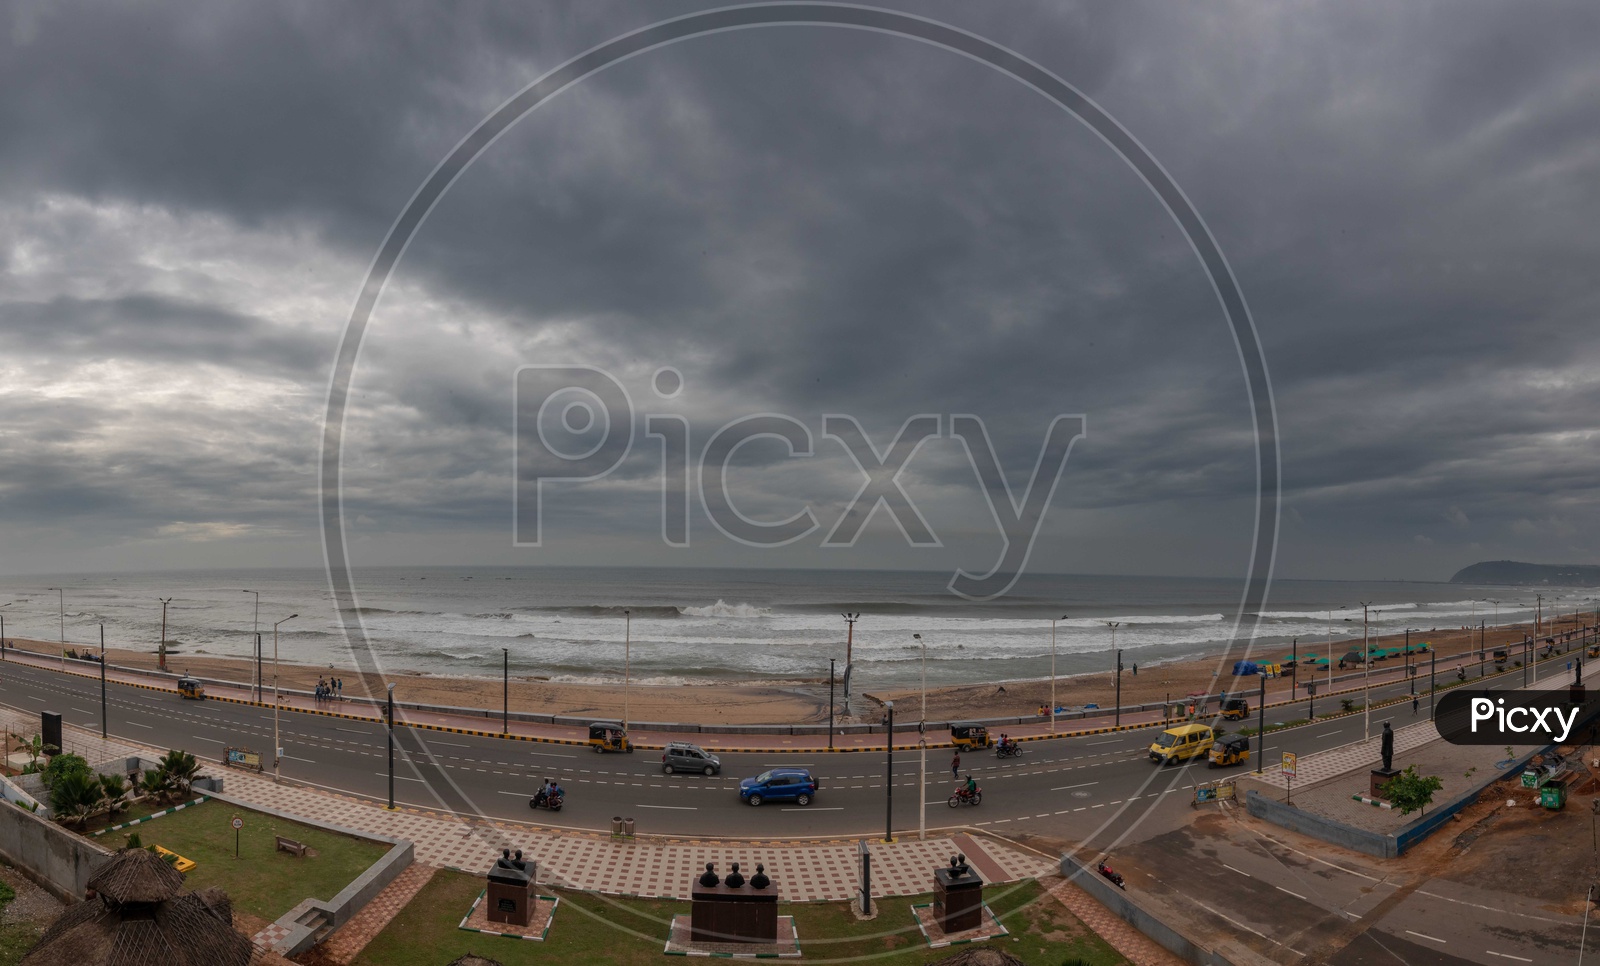 Vizag beach road with a cloudy sky